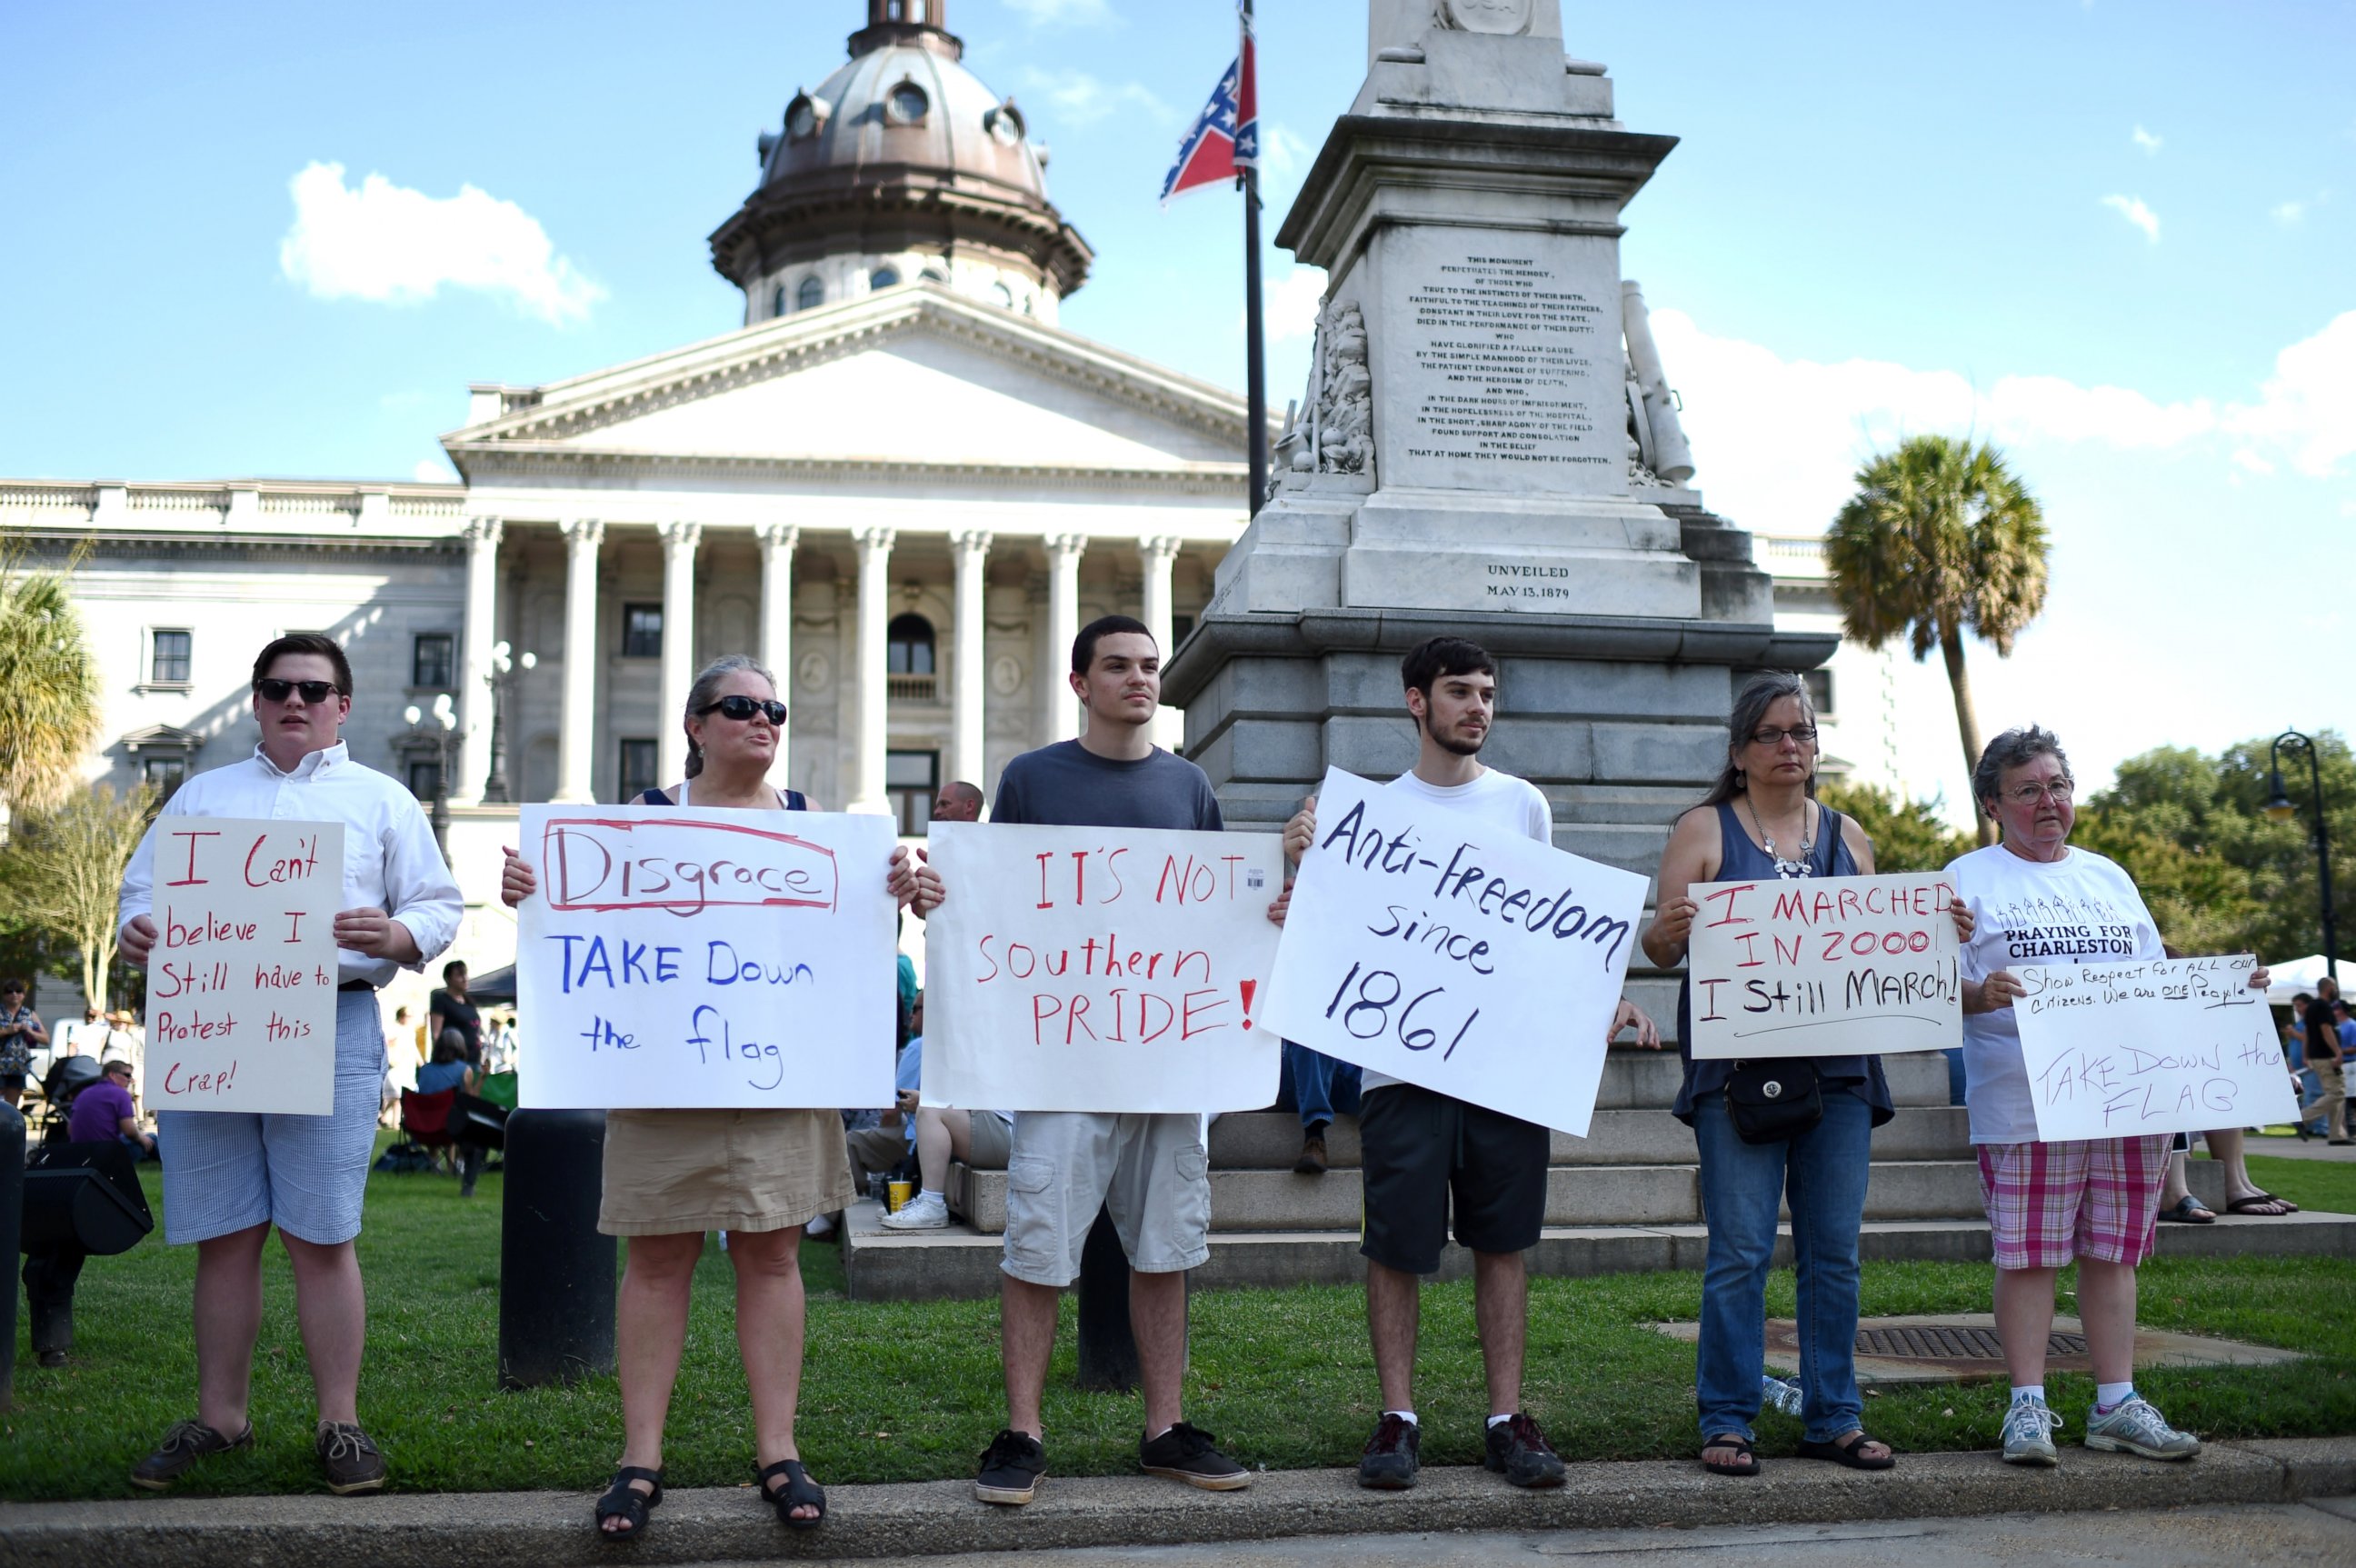 PHOTO: Protesters hold signs in front of the Confederate flag during a rally to take down the flag at the South Carolina Statehouse, June 20, 2015, in Columbia, S.C.